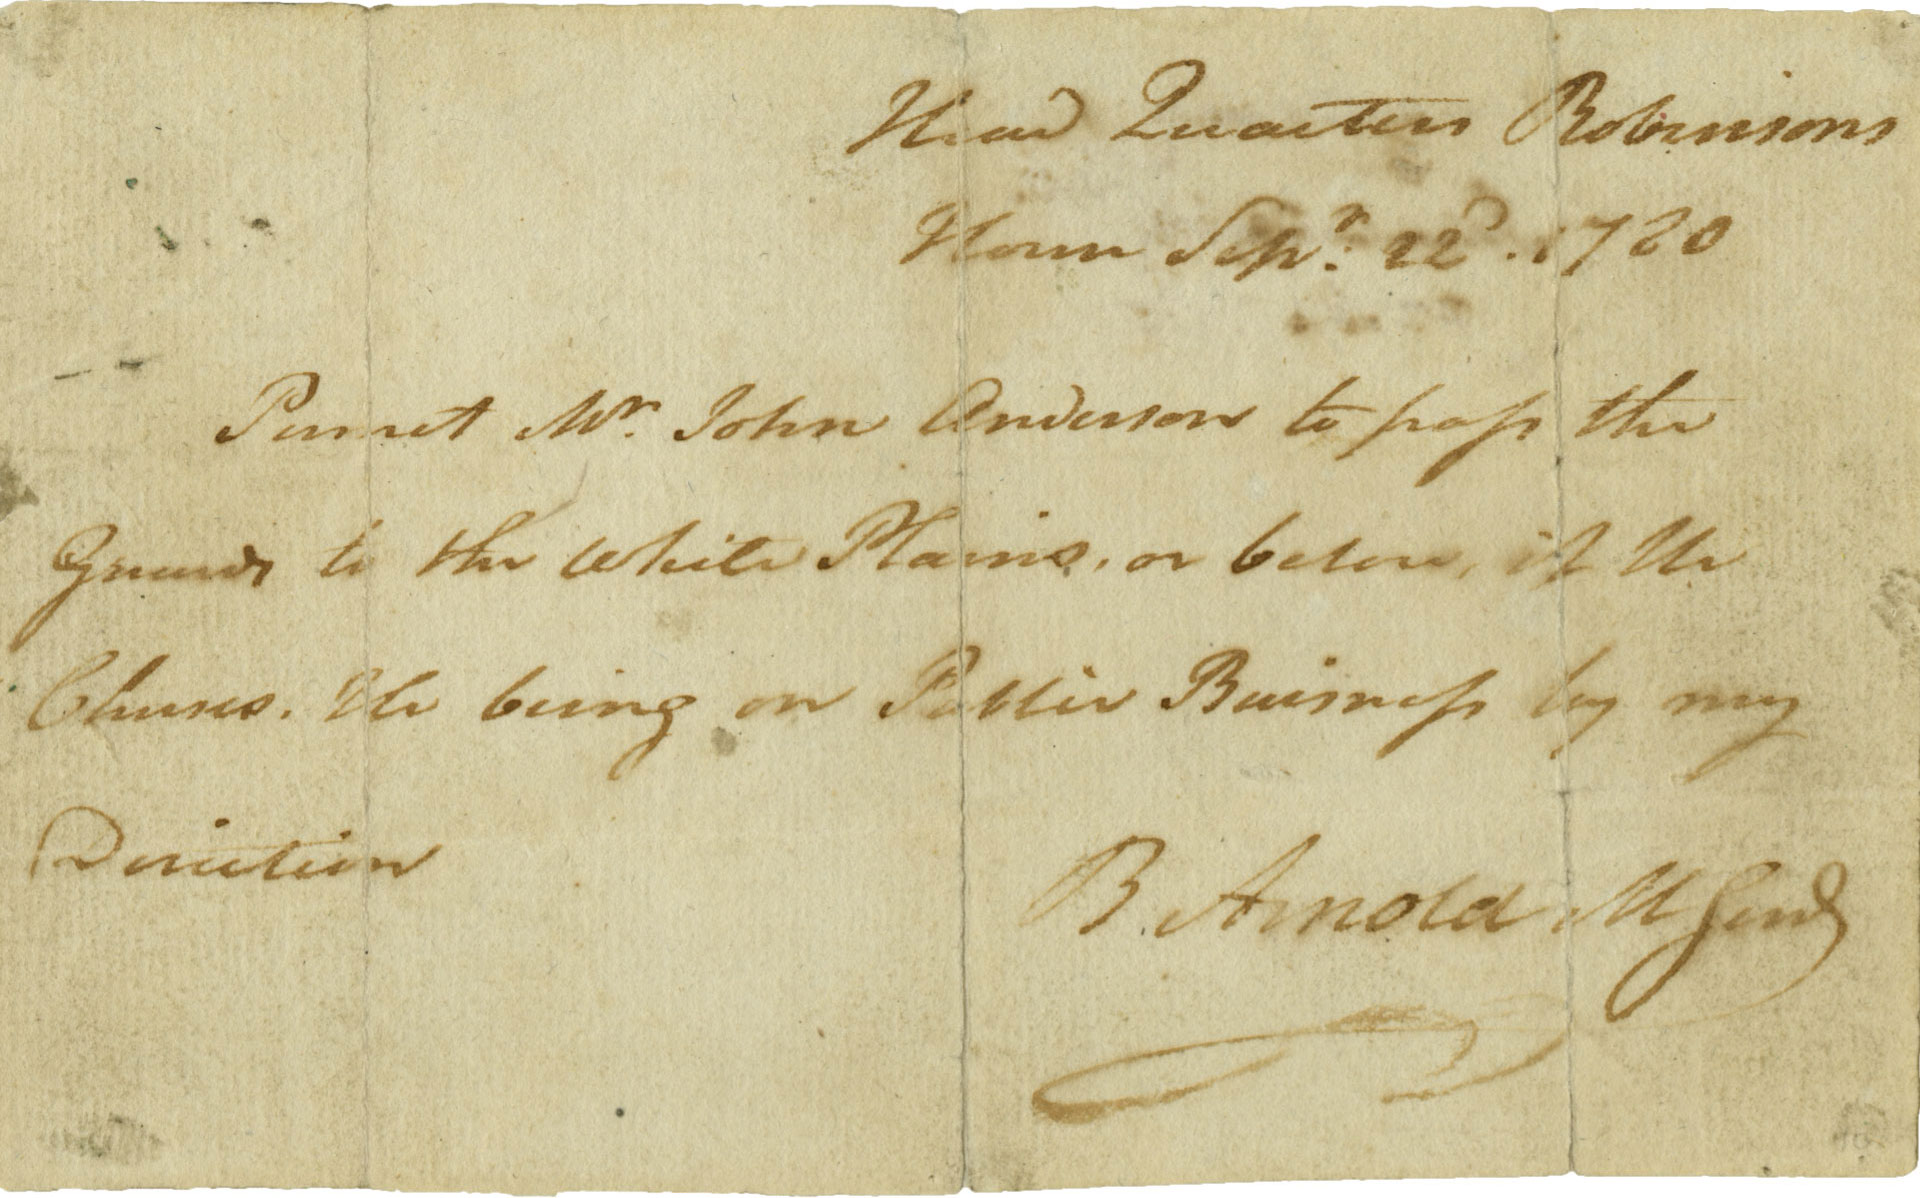 A note allowing safe passage of John André